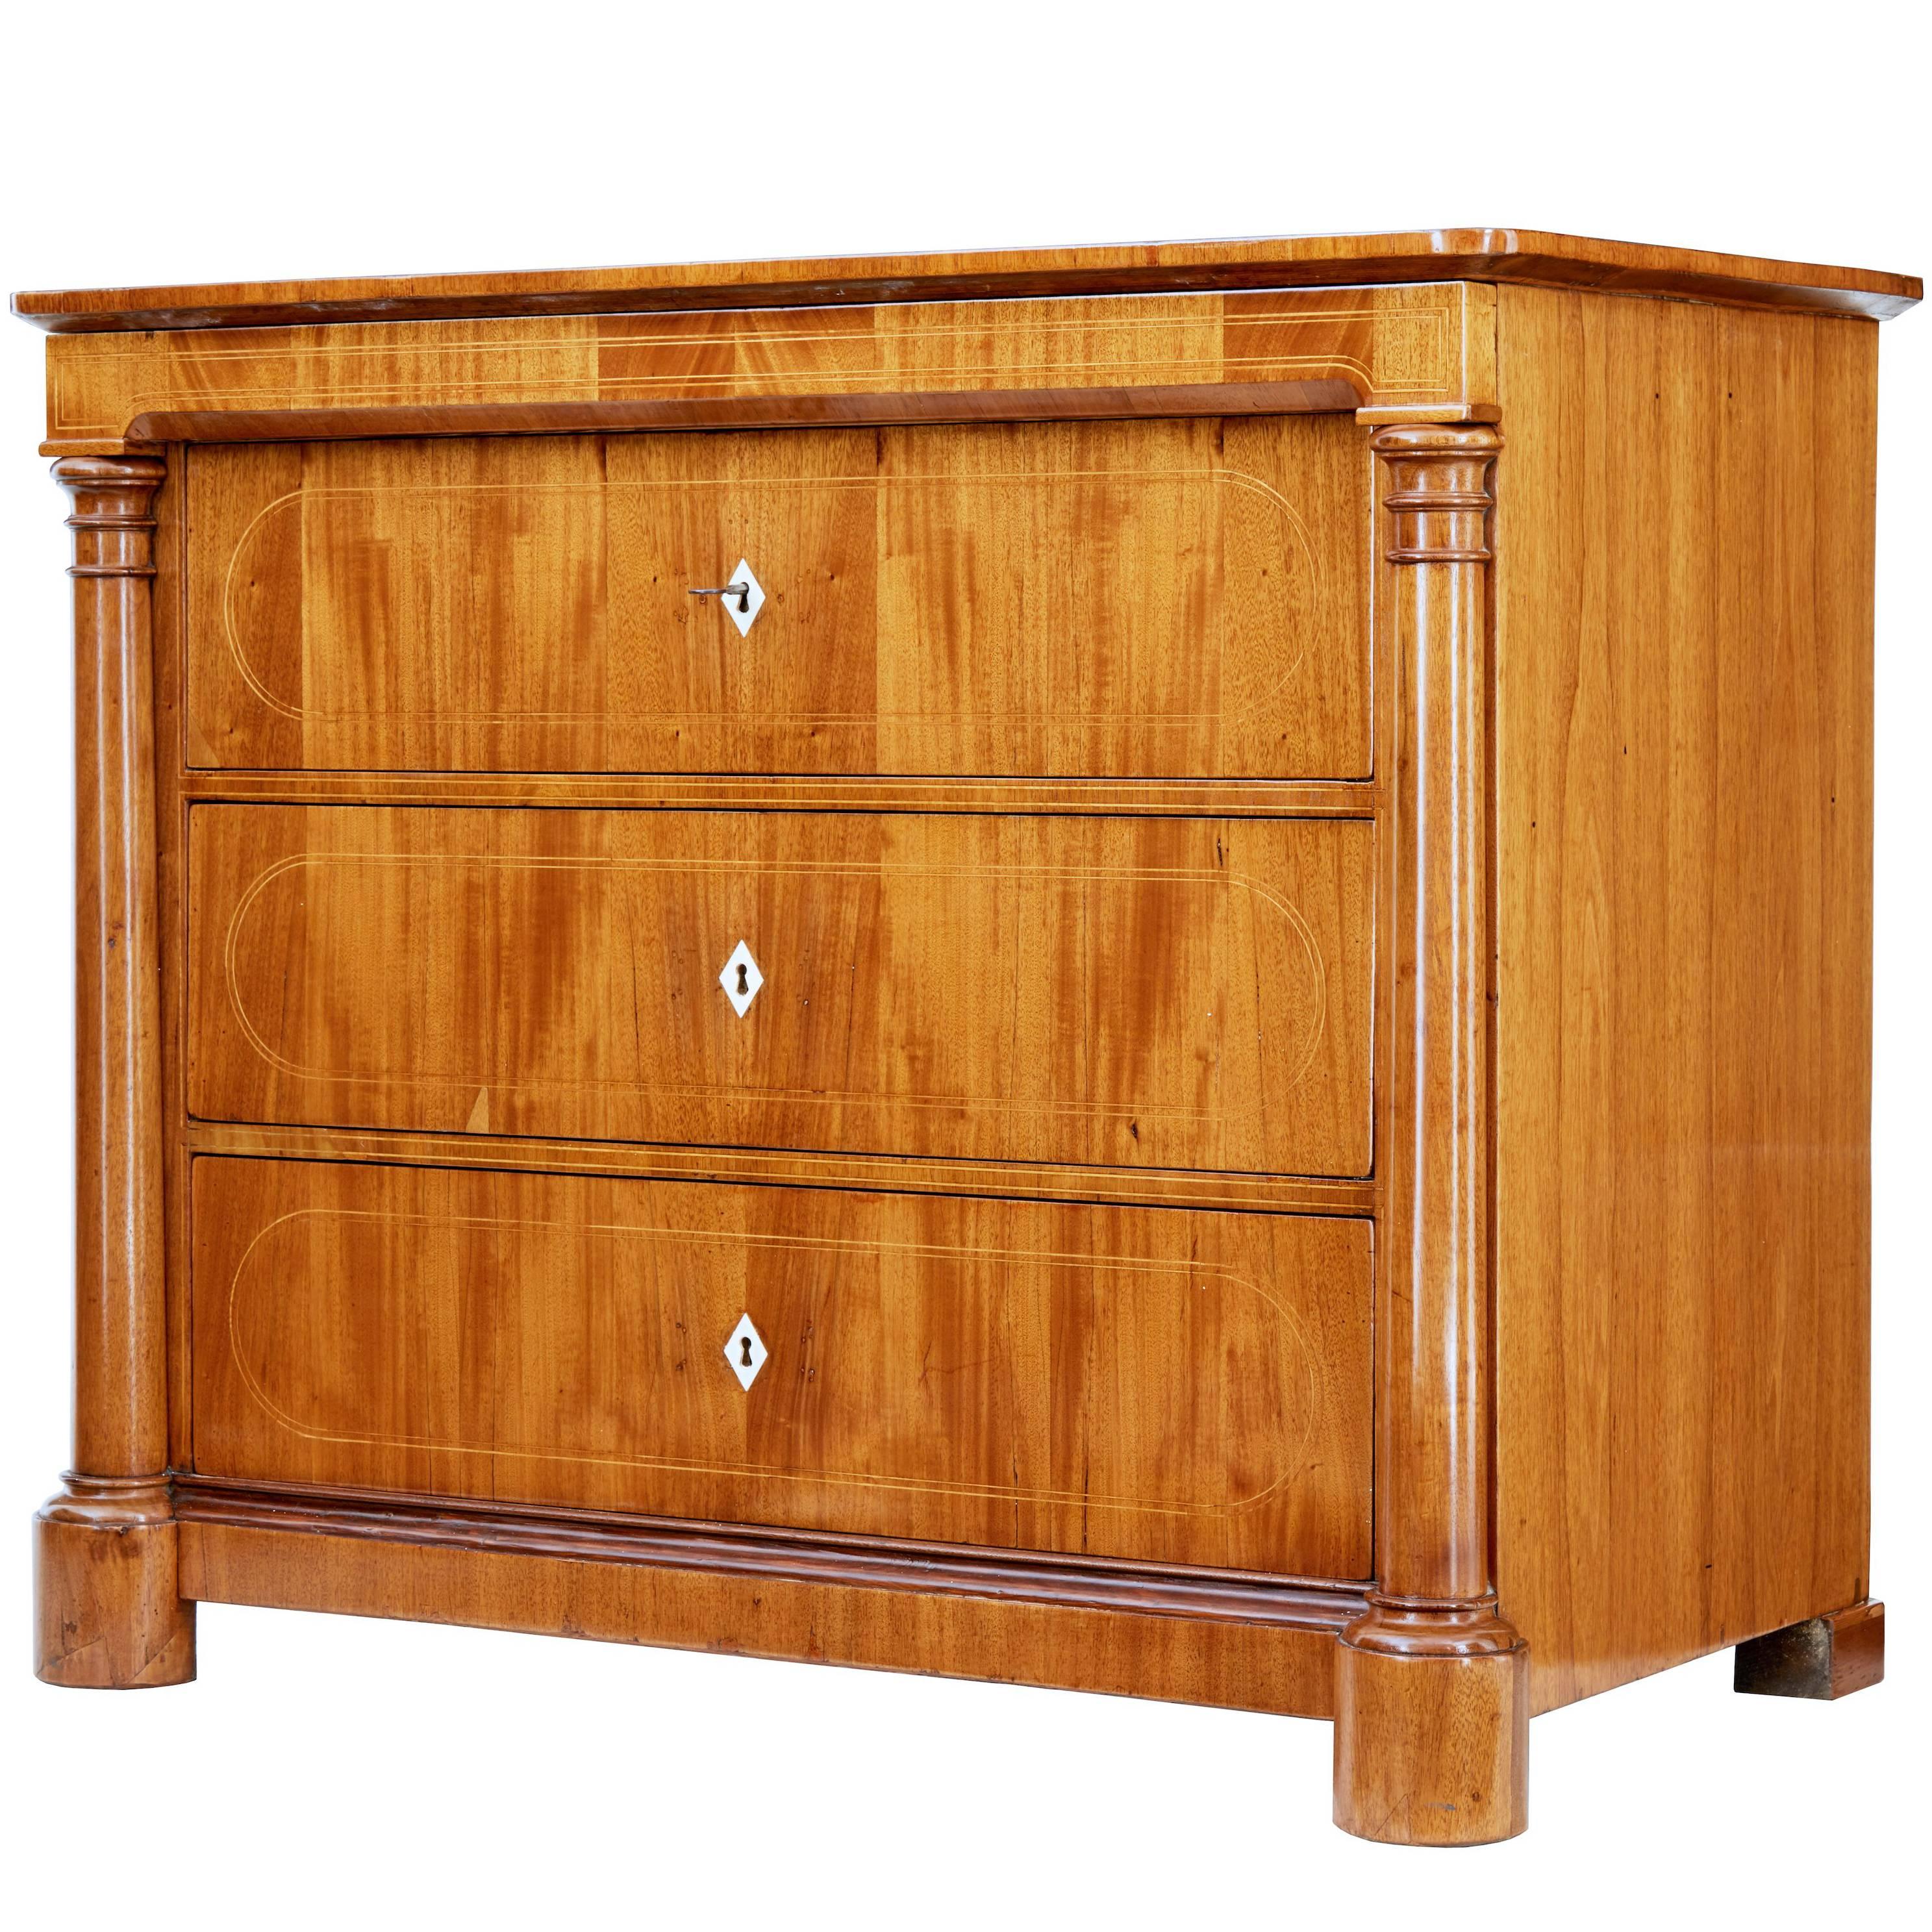 Early 19th Century, Danish Walnut Commode Chest of Drawers